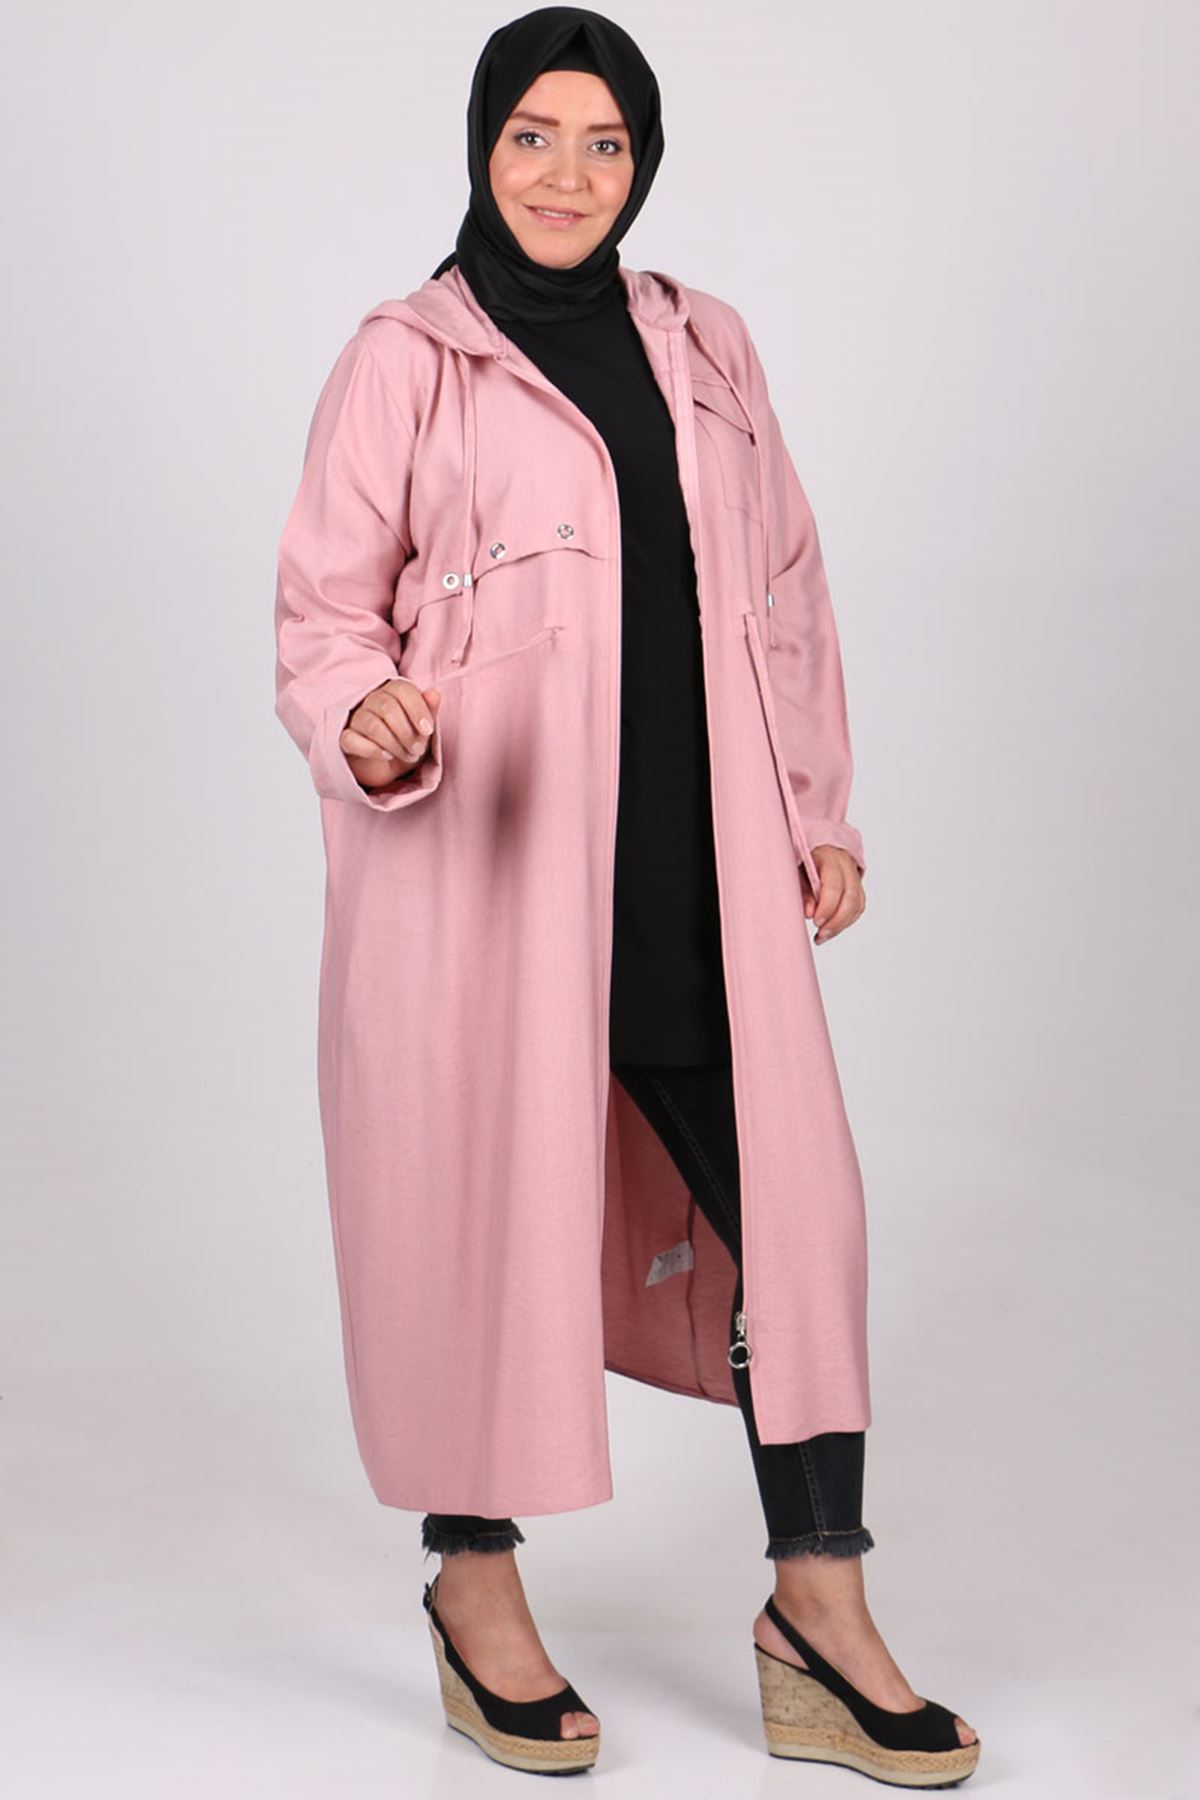 3143 Plus Size Hooded Rayon Lİnen Coat -Navy  Blue